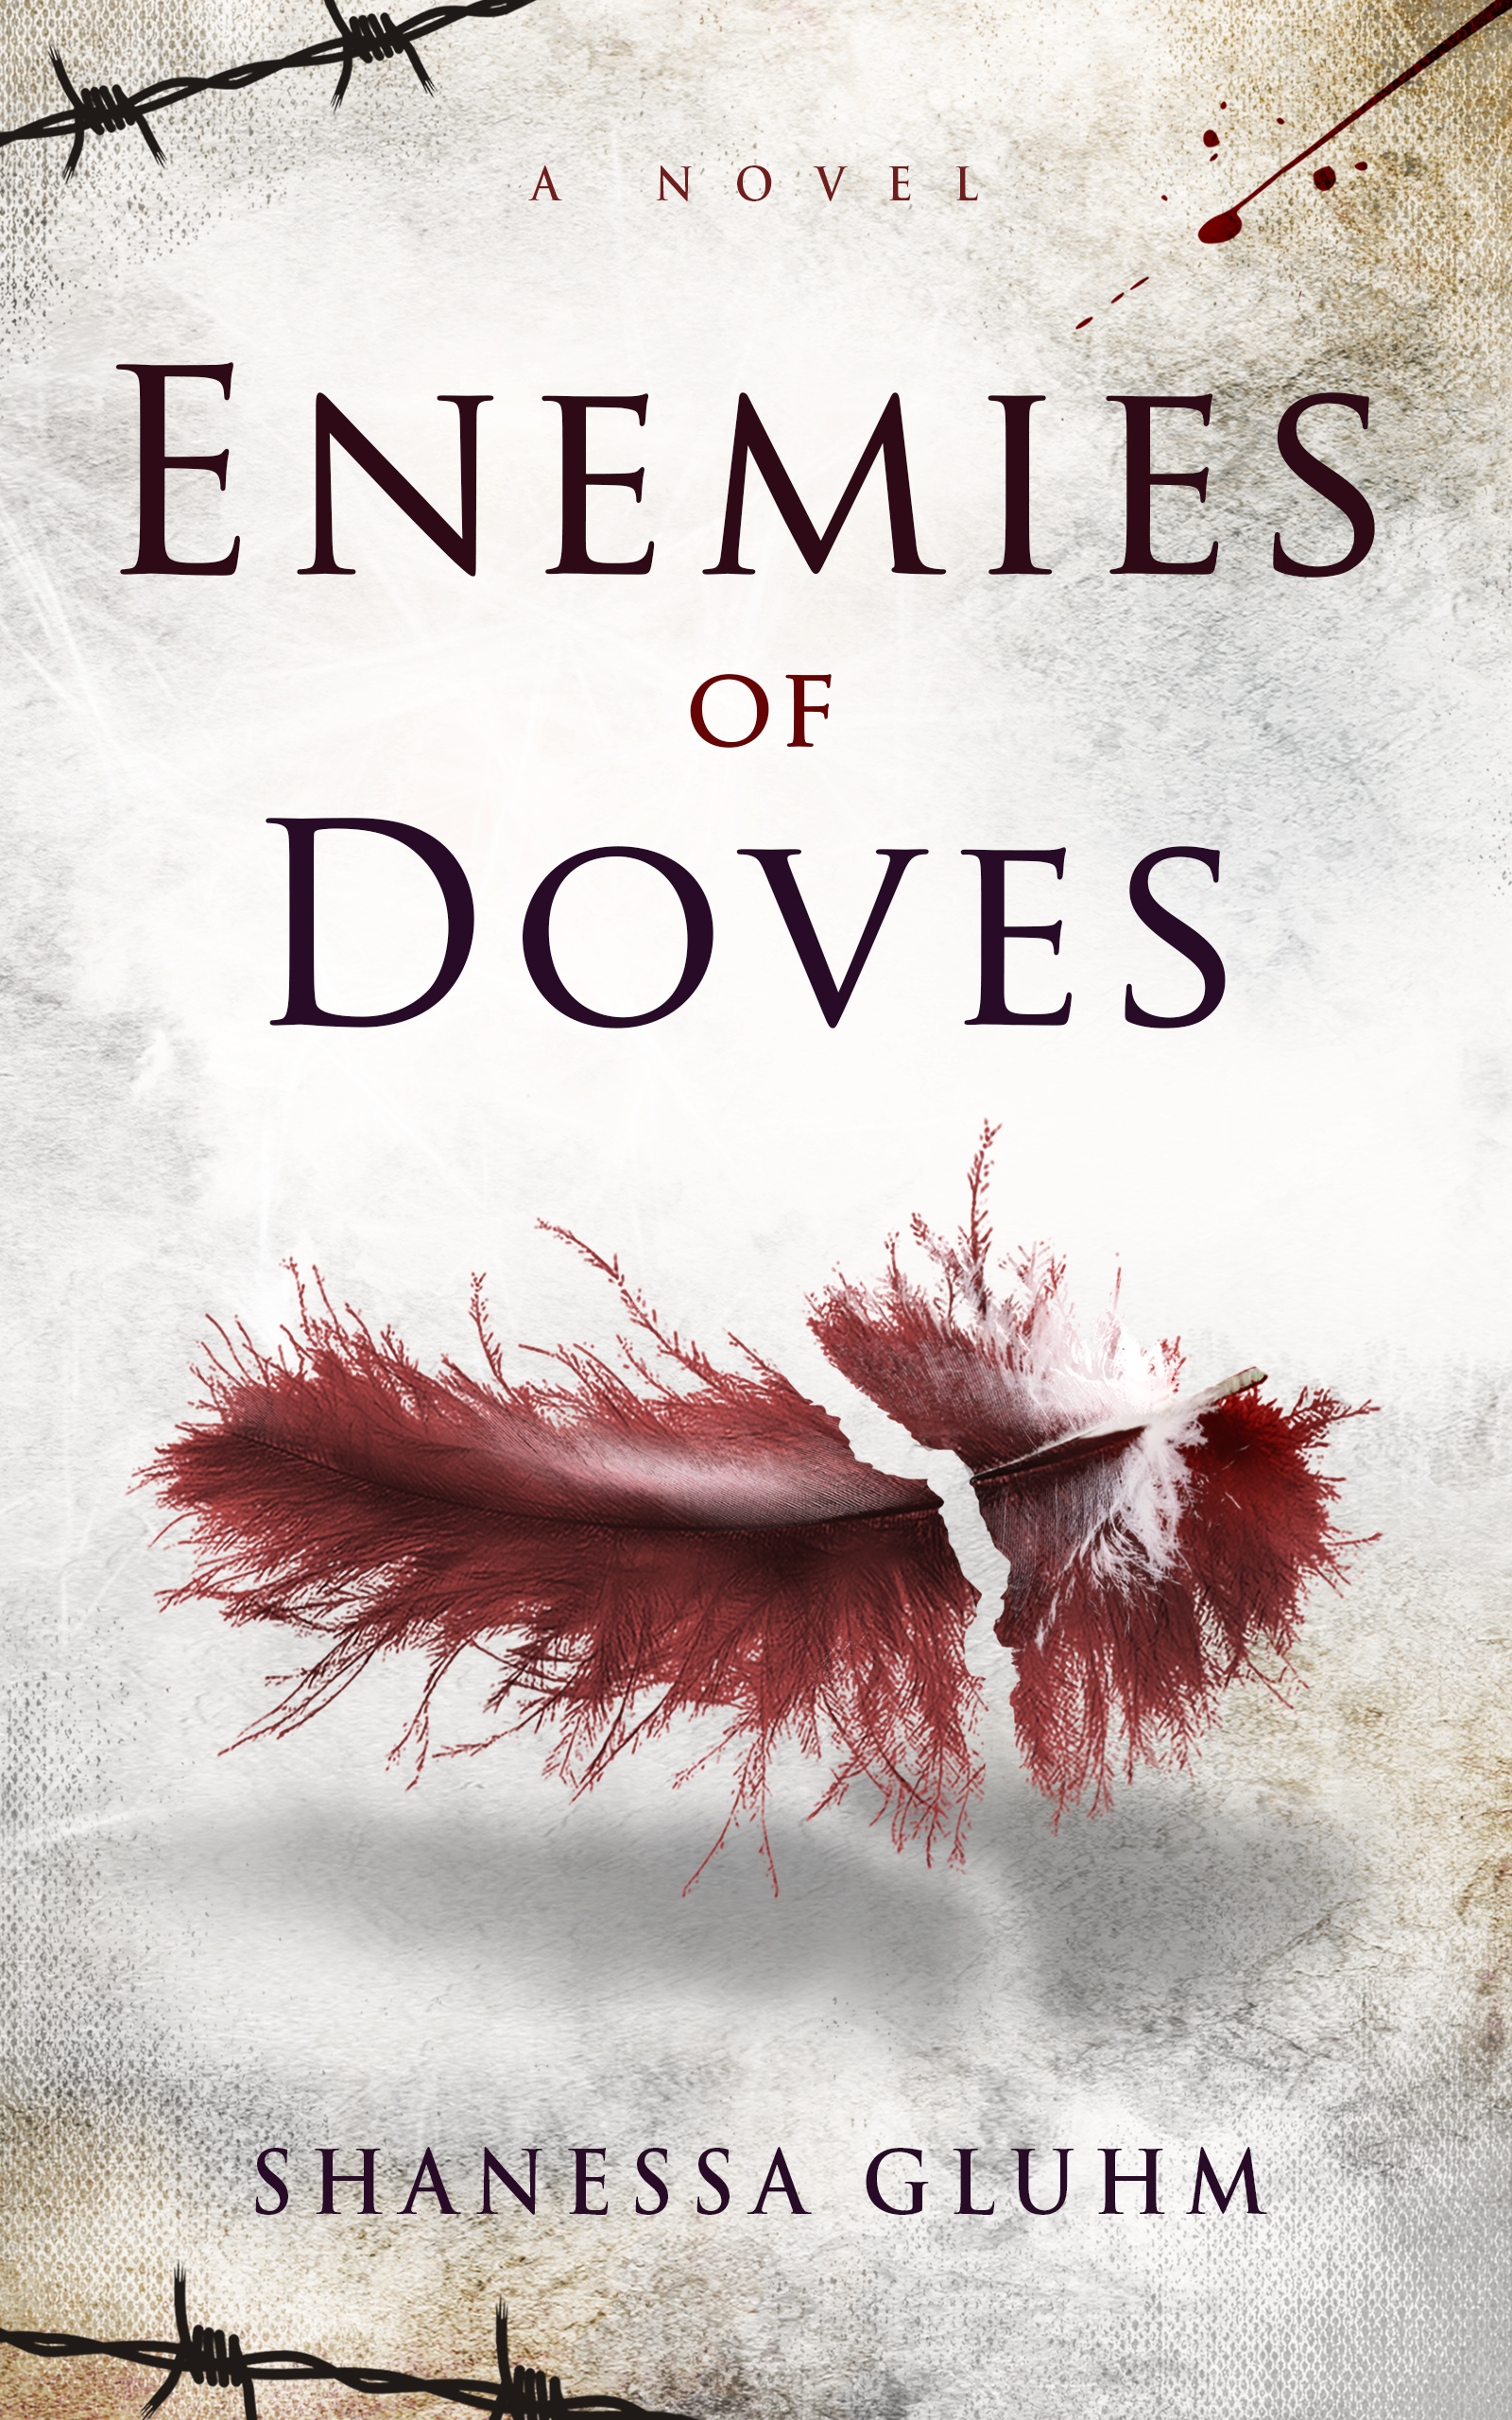 Enemies of Doves by Shanessa Gluhm